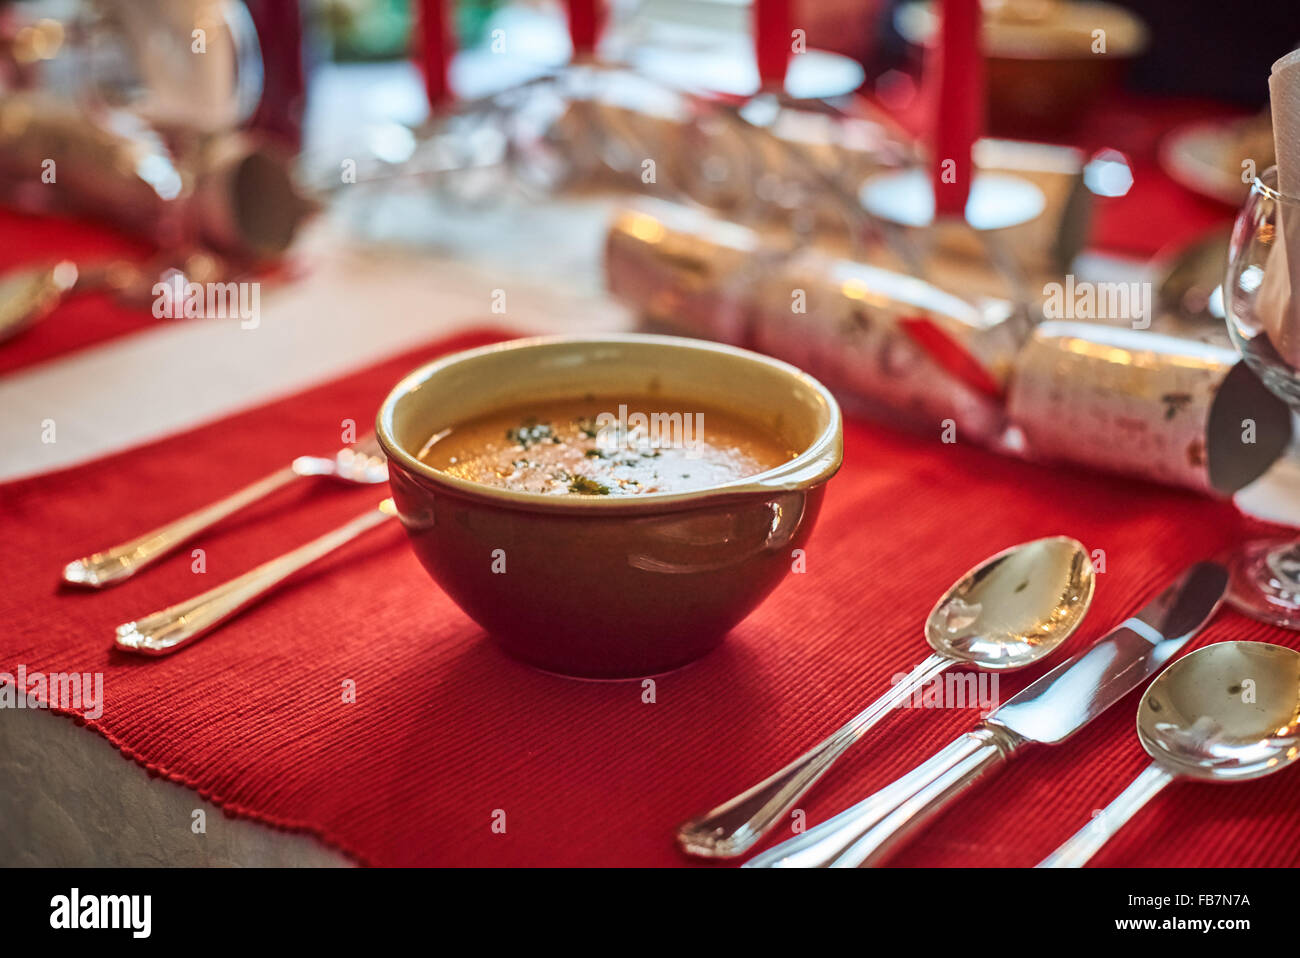 Bowl of soup at a Christmas dinner Stock Photo